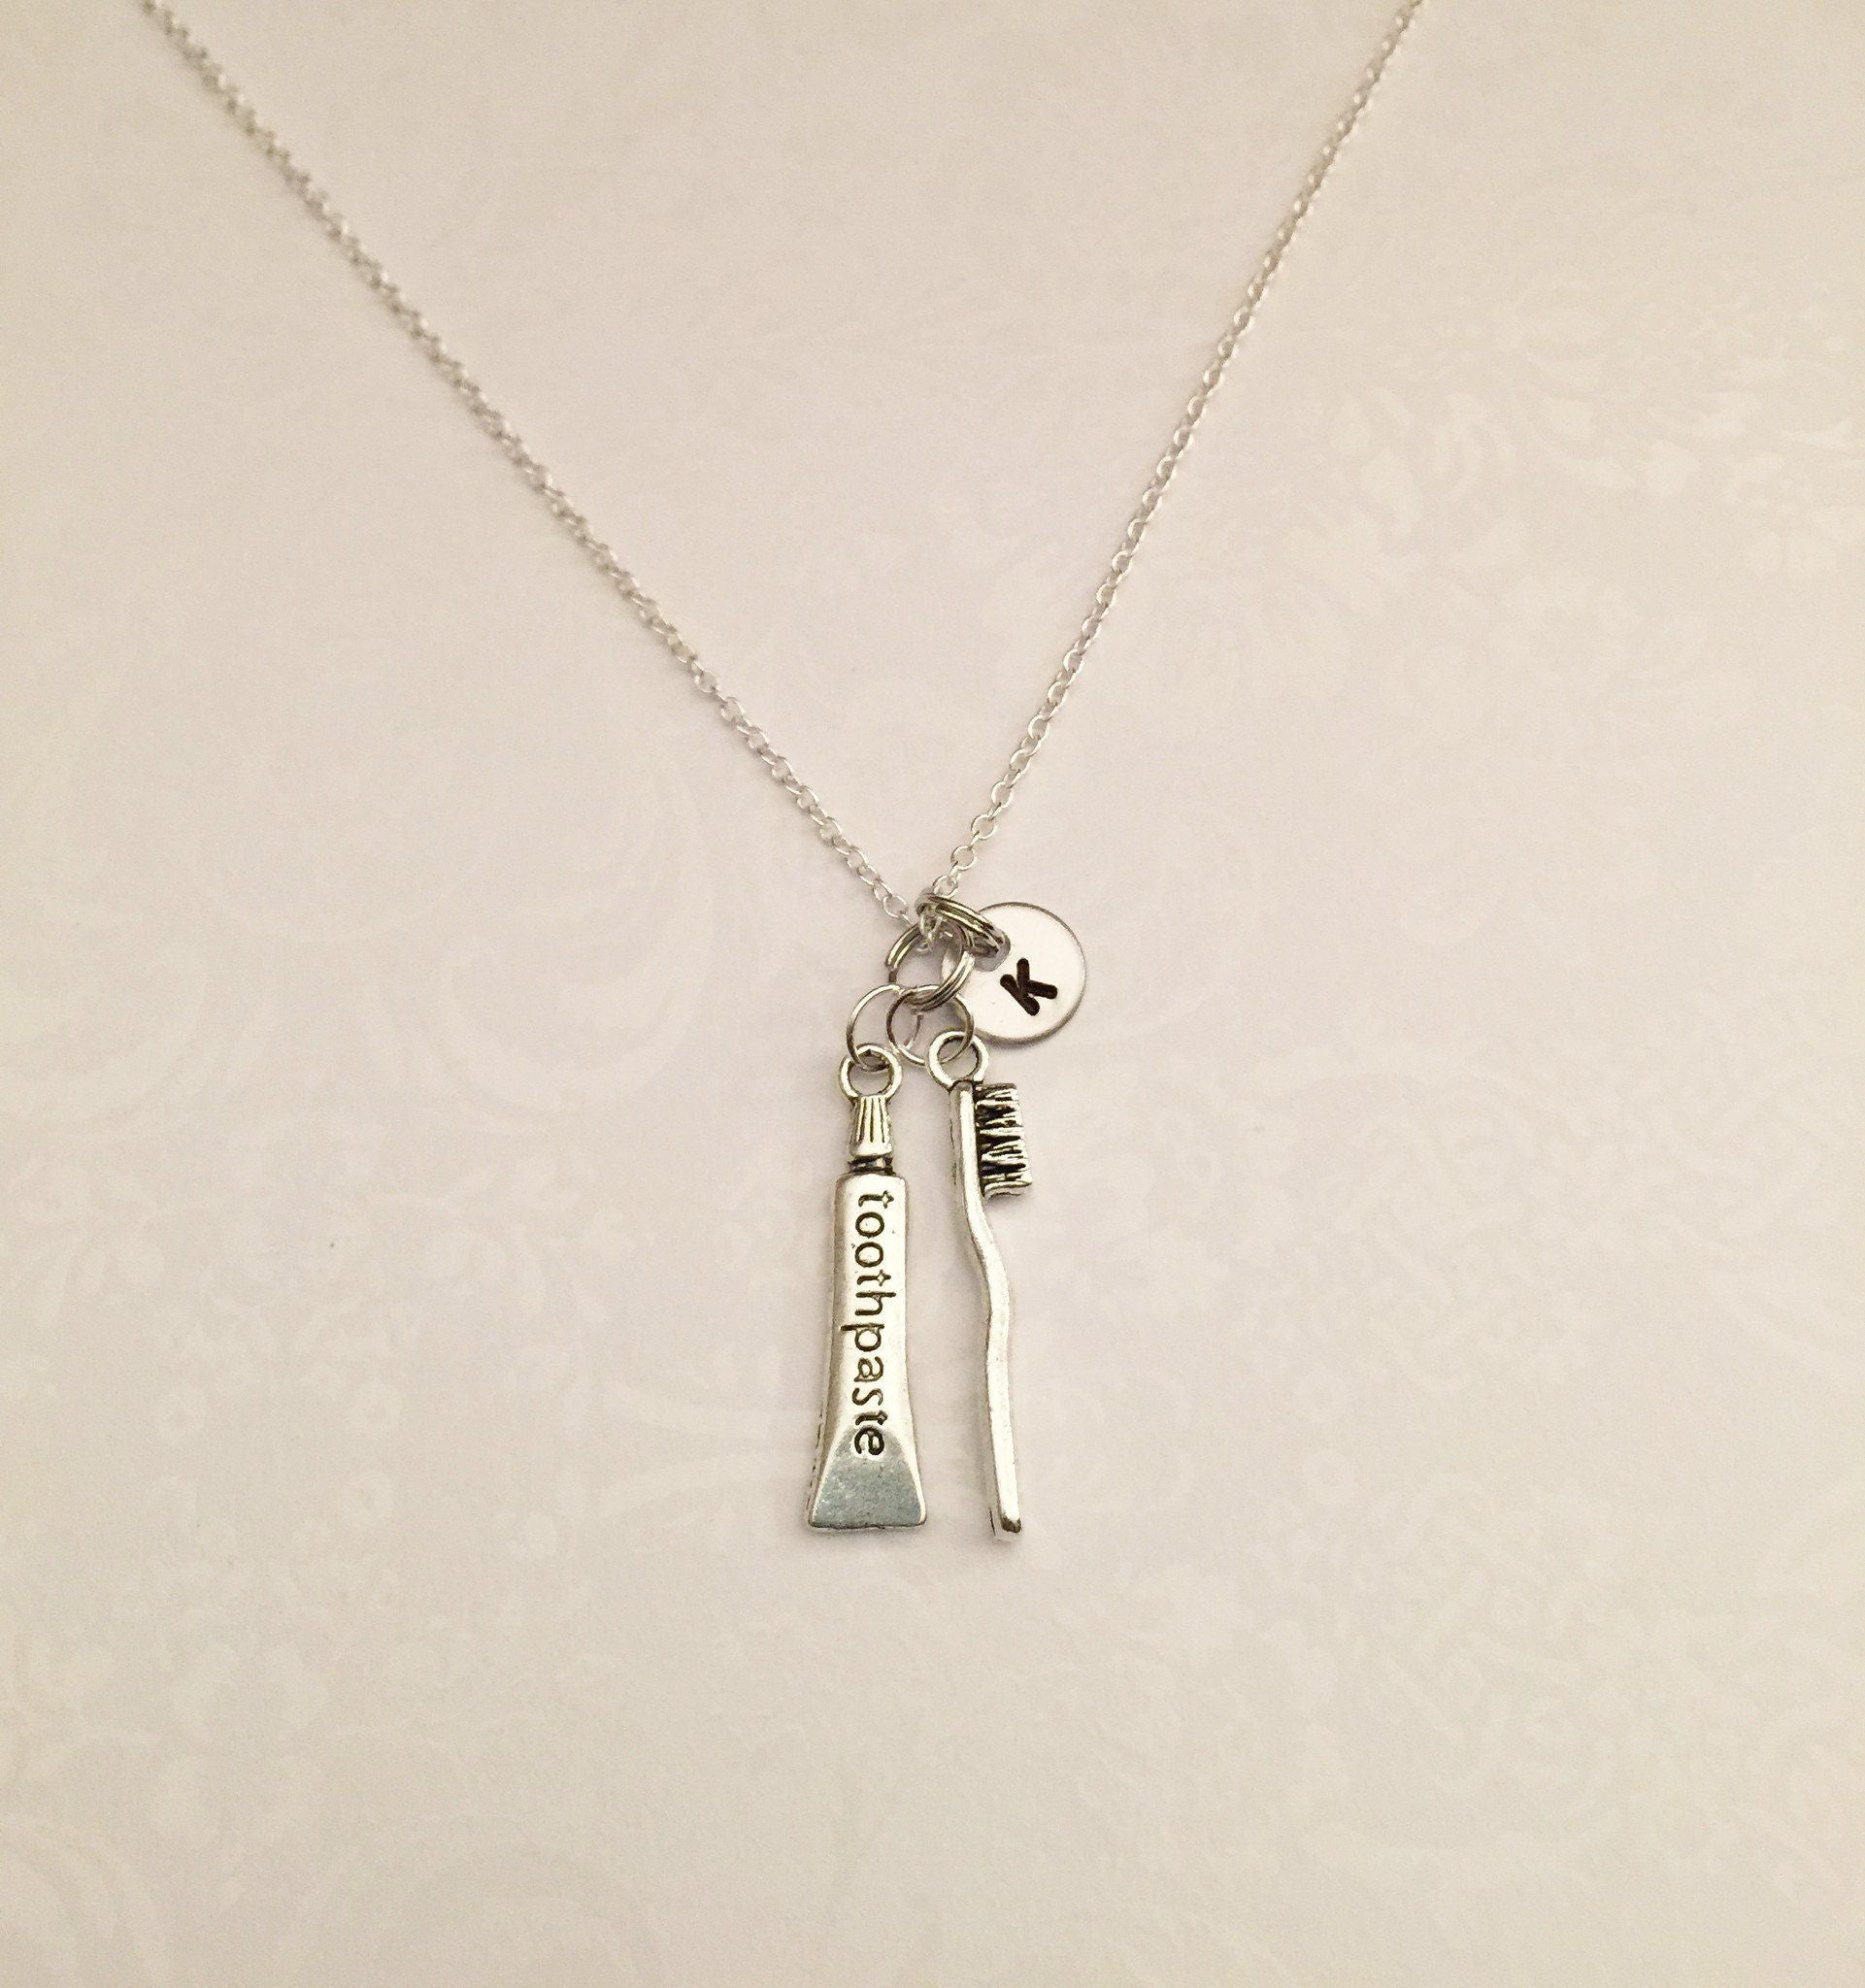 Toothpaste & Toothbrush Necklace with Initial - Anomaly Creations & Designs